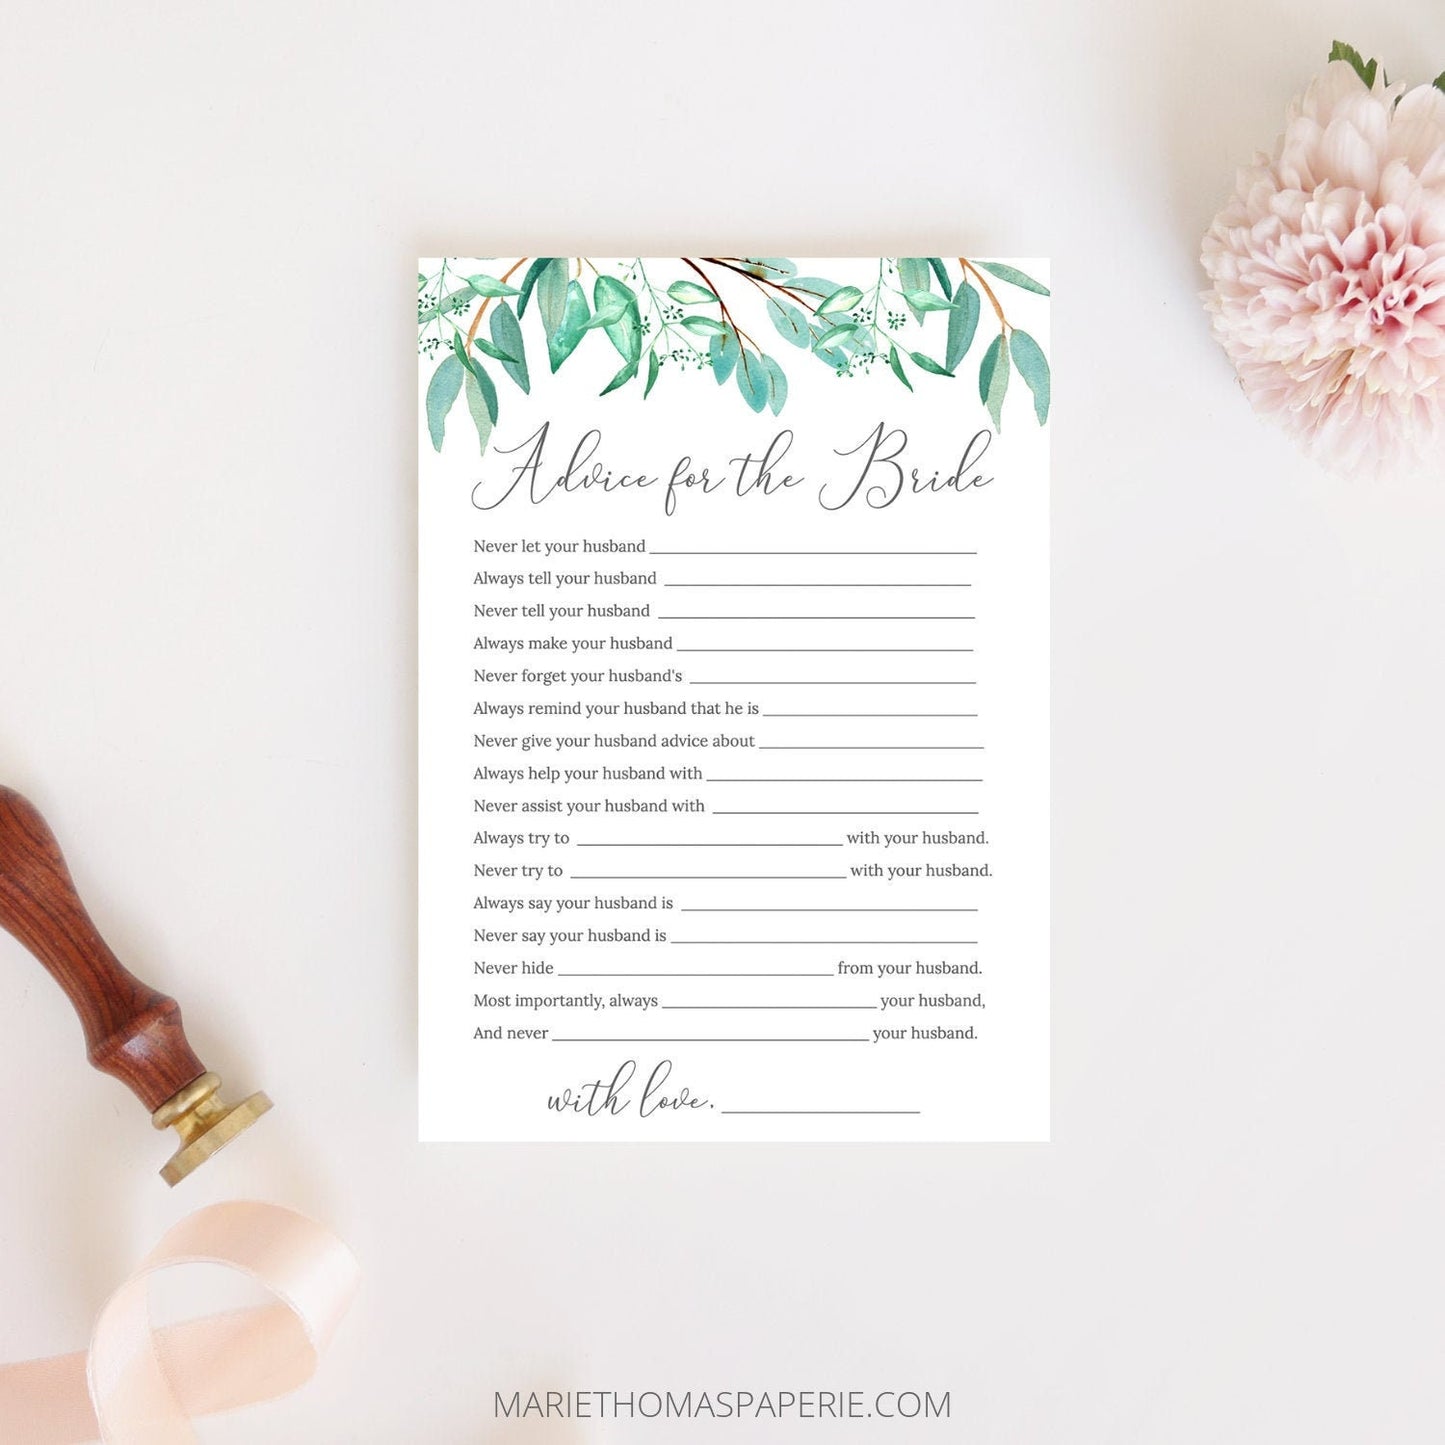 Editable Bridal Shower Games Wedding Advice Cards Advice for the Bride Greenery Template